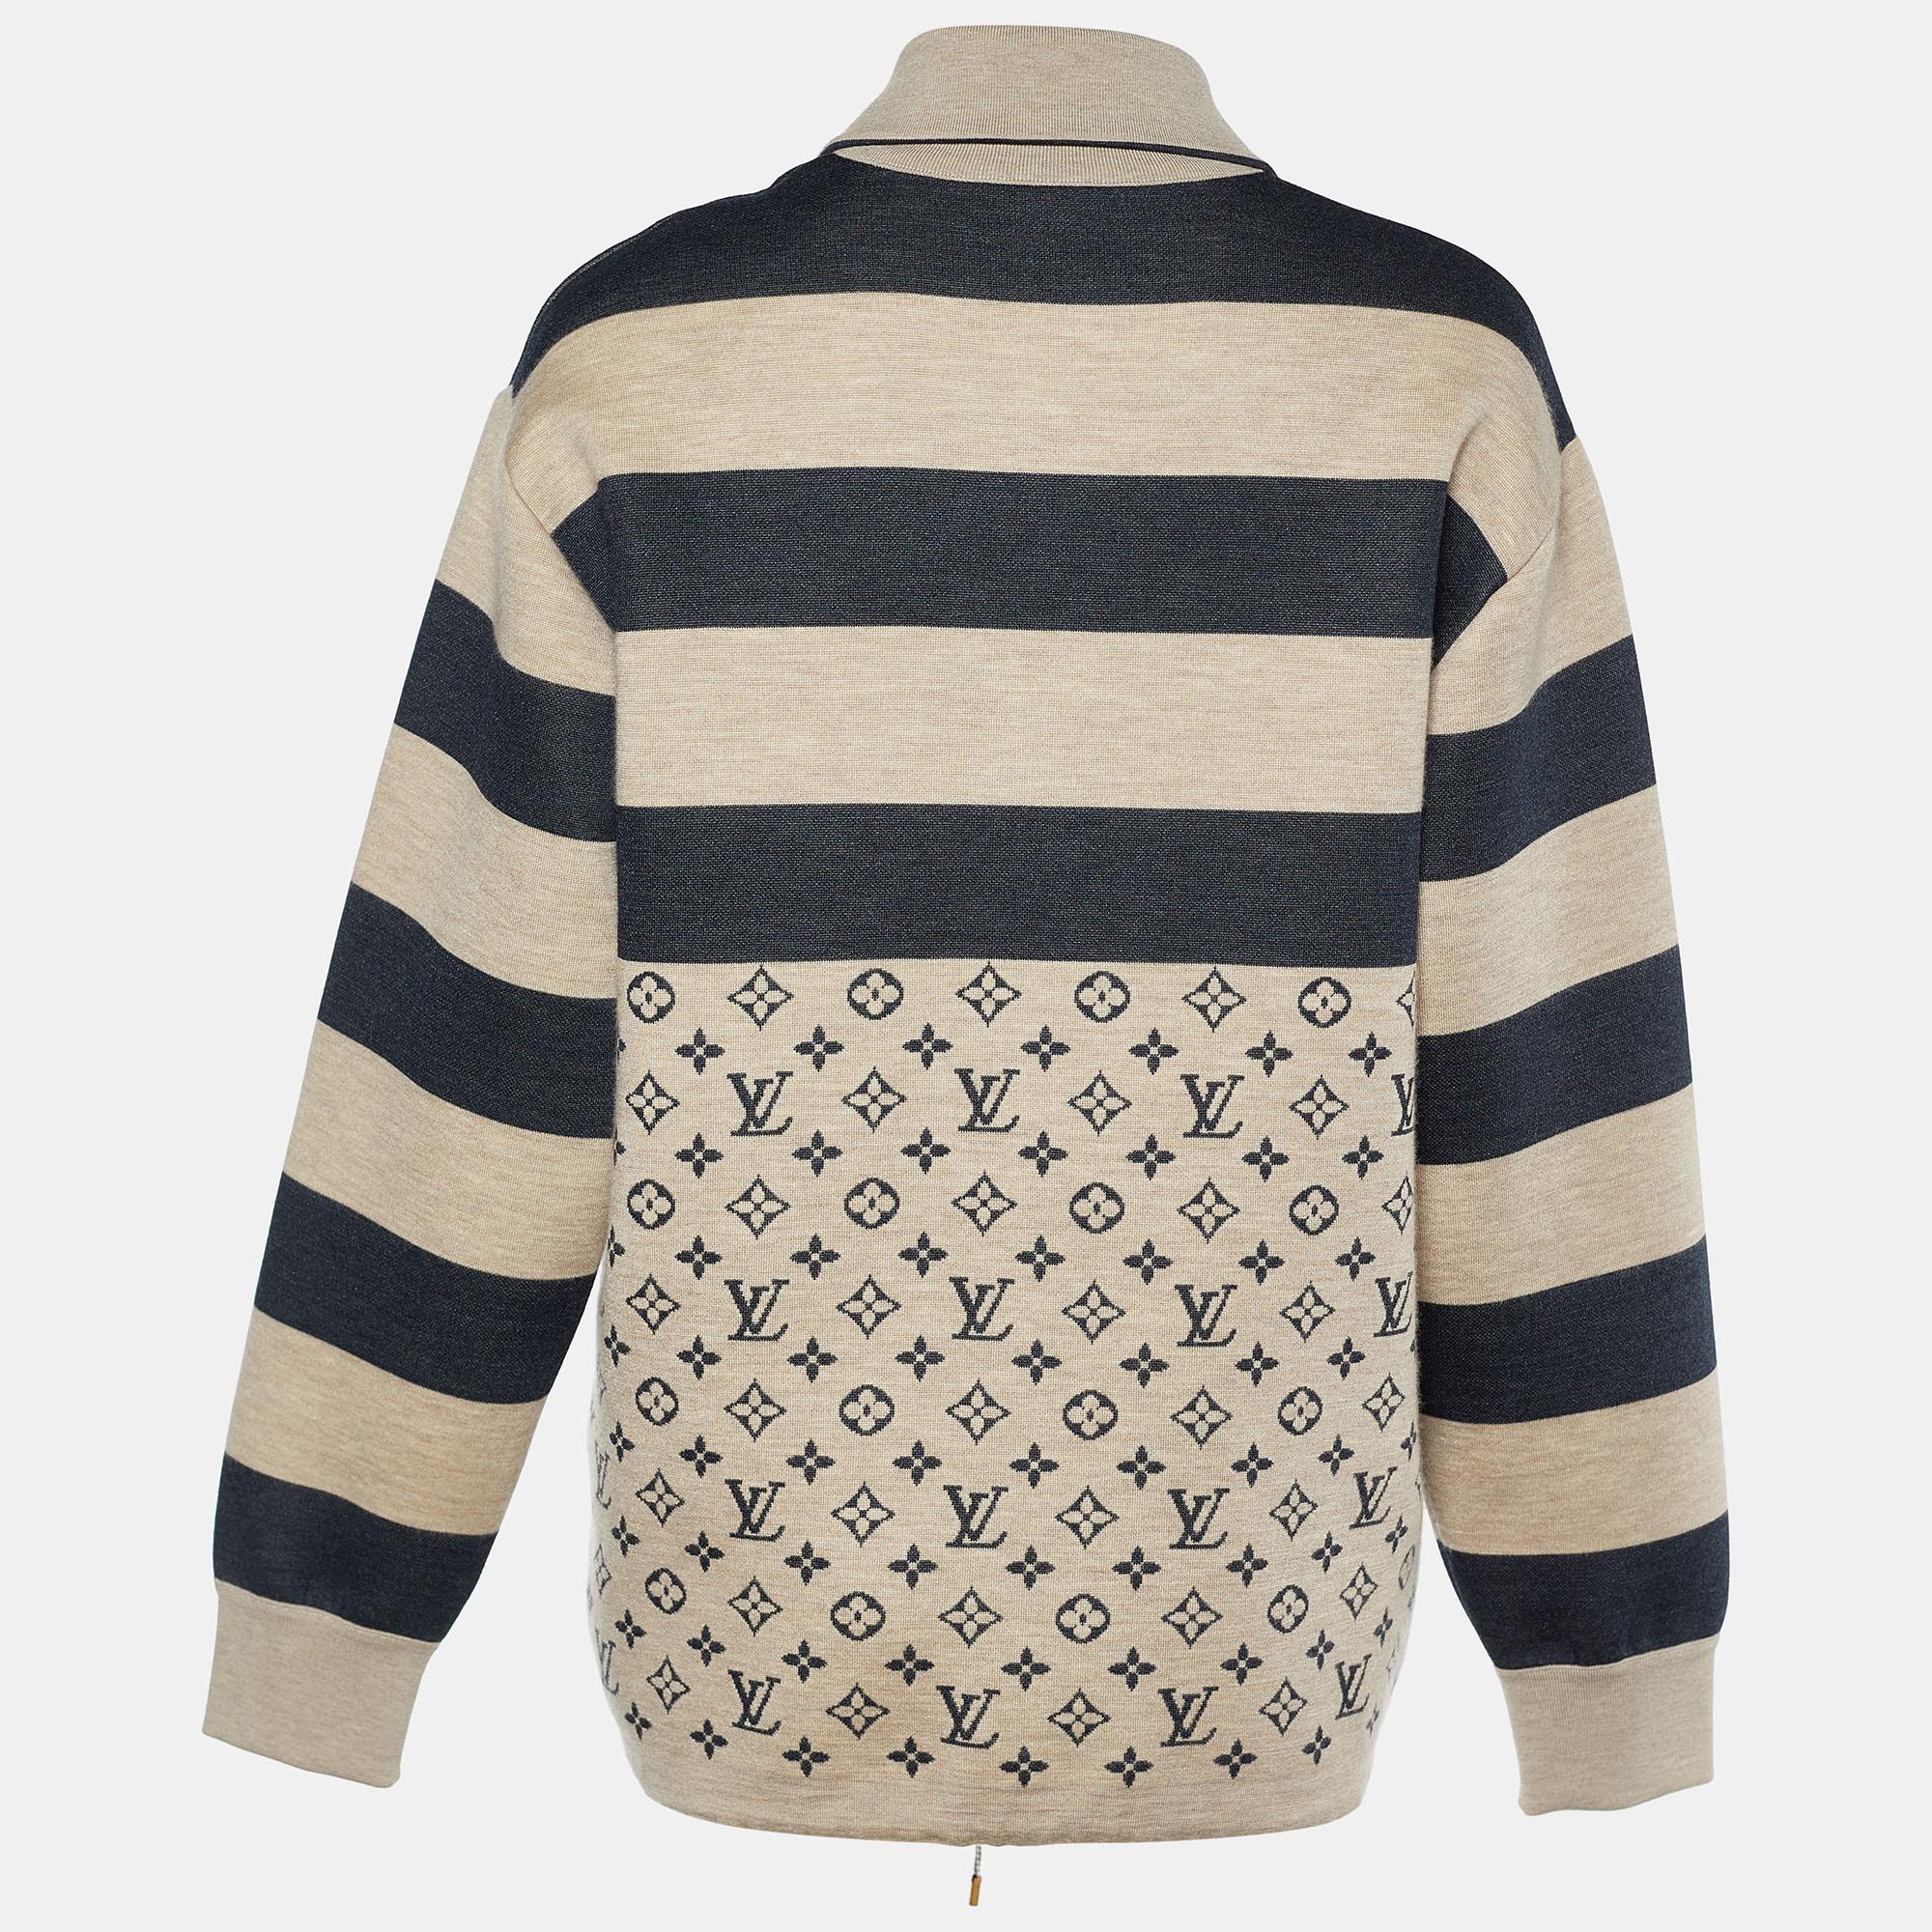 Louis Vuitton's signature styles are truly impressive, and this classy jacket is a testament to that! Made from beige and navy cashmere blend fabric, this jacket is embellished with striped and Monogram prints. This LV jacket is provided with a